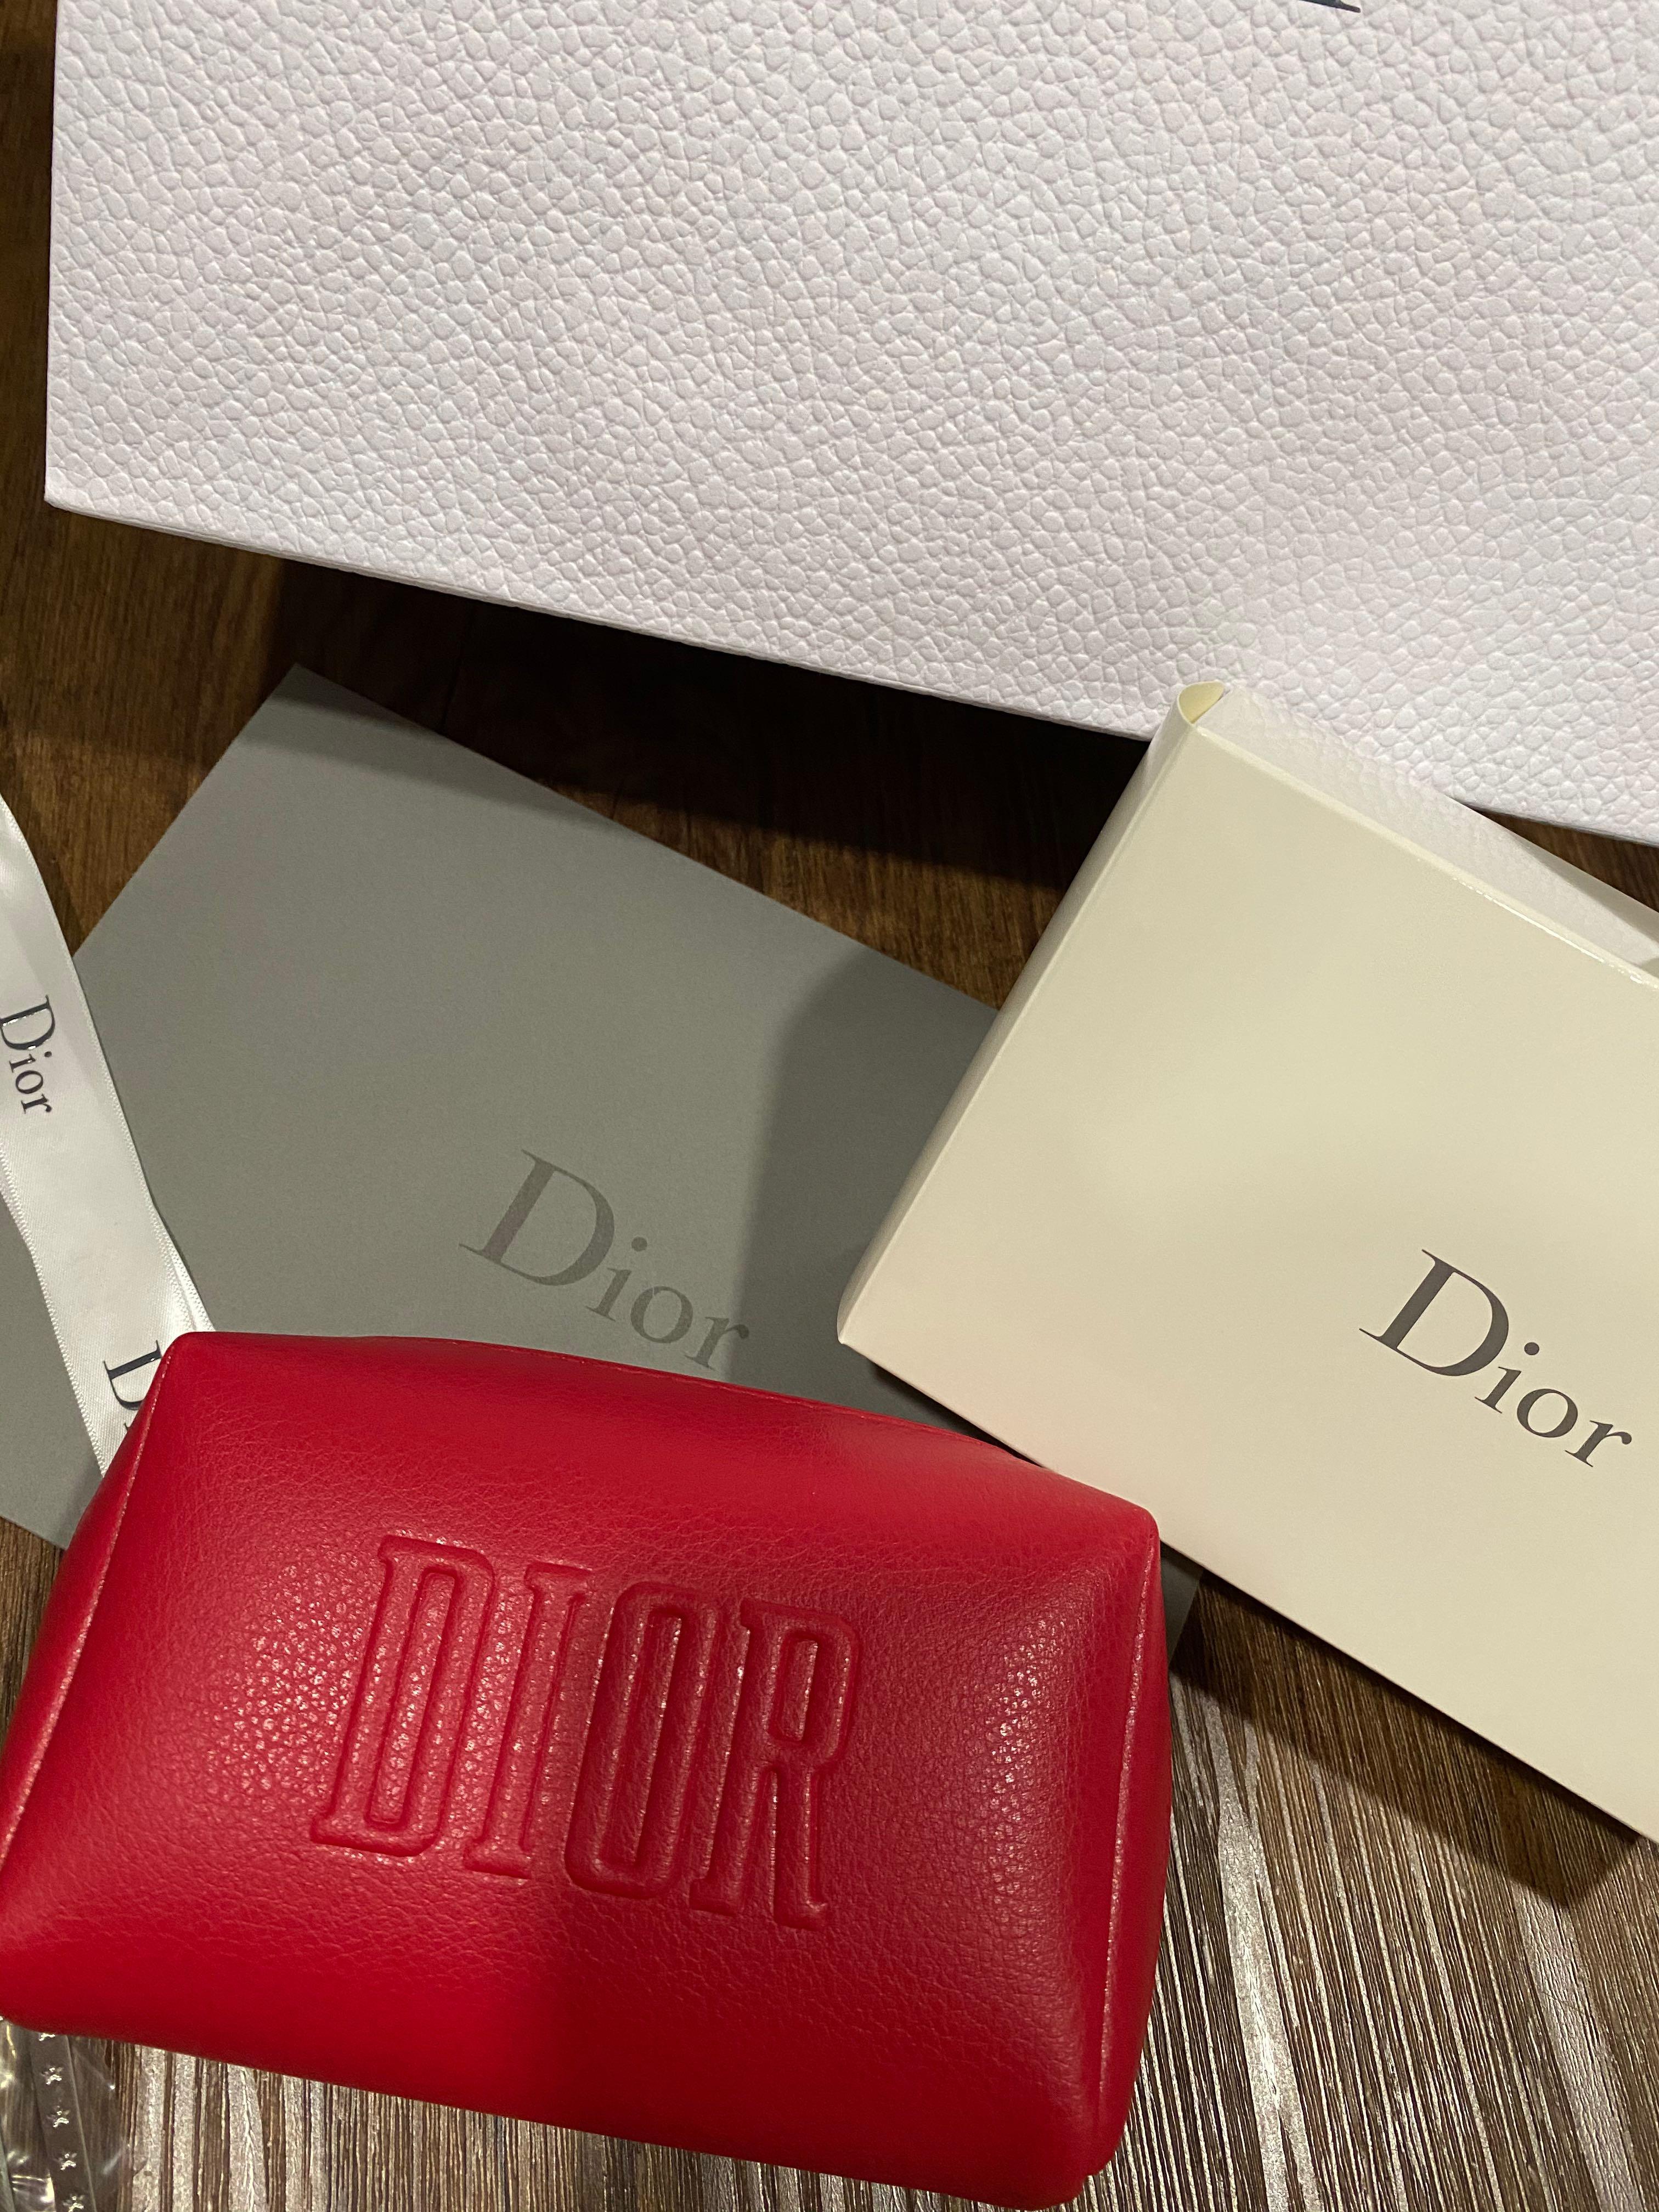 Christian Dior Trousse Pouch, Luxury 